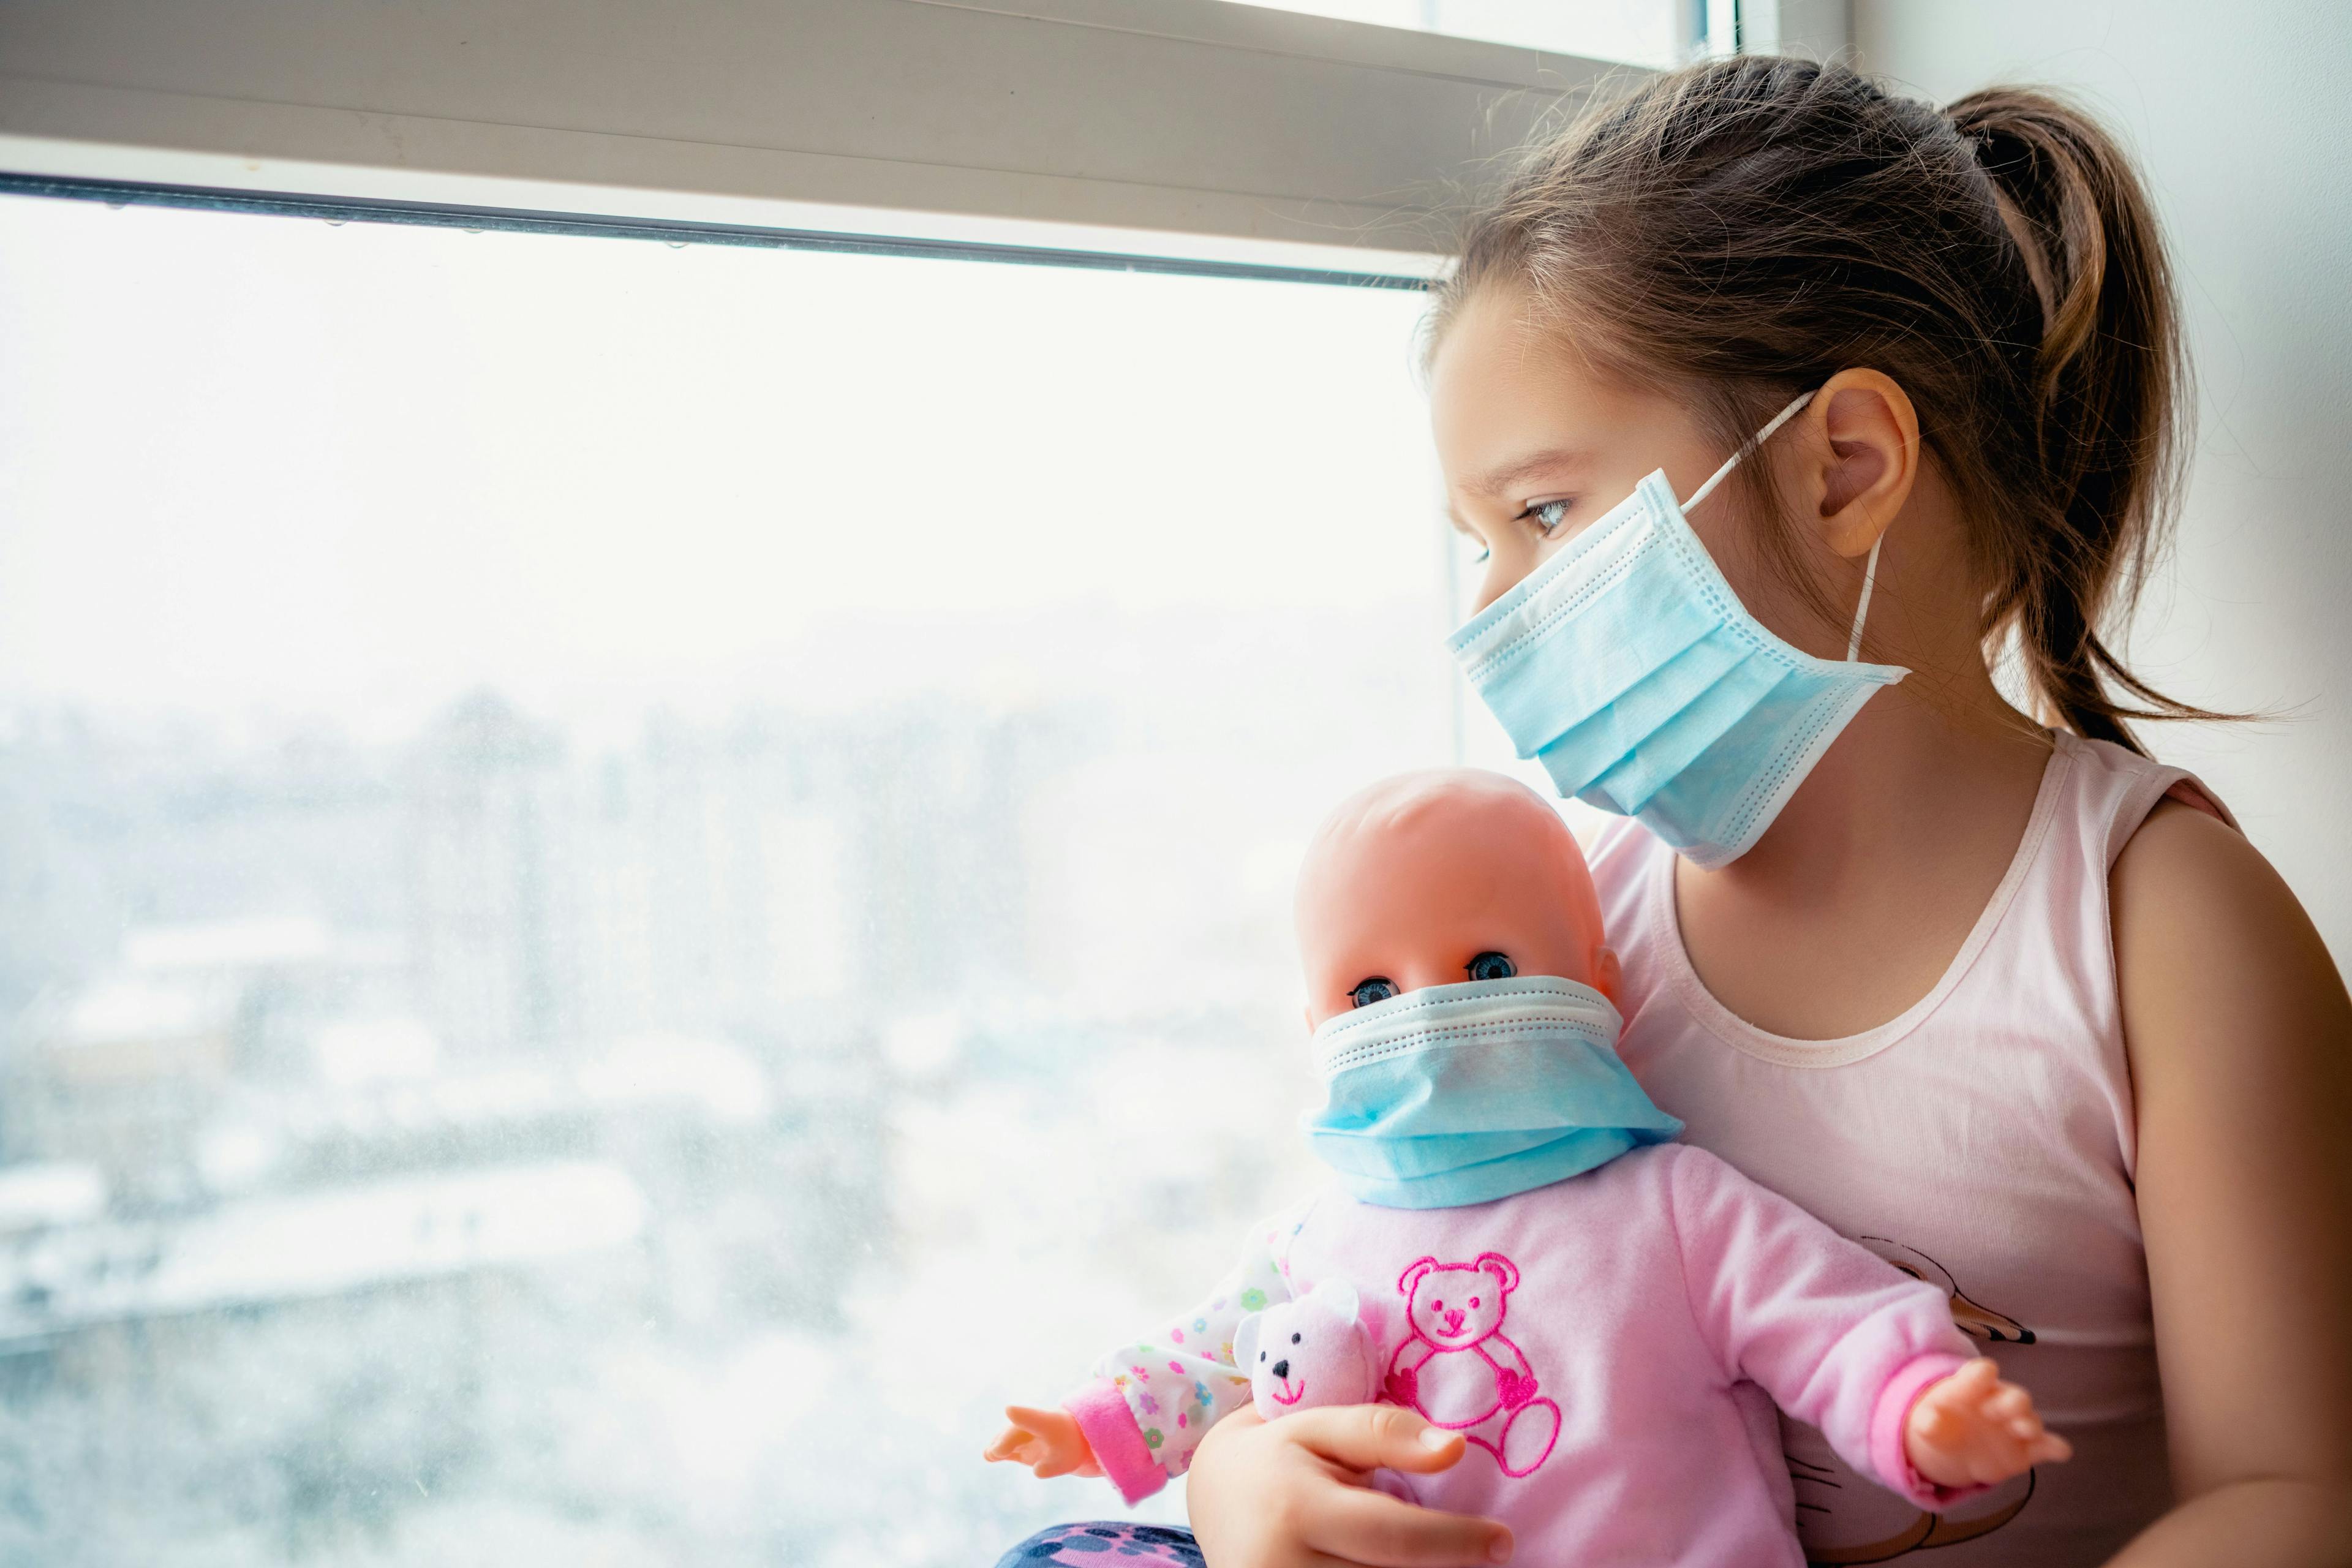 A study of children positive for COVID-19 found the overall risk of developing severe disease to be low, but risk factors included age, underlying chronic illness, and symptom duration.